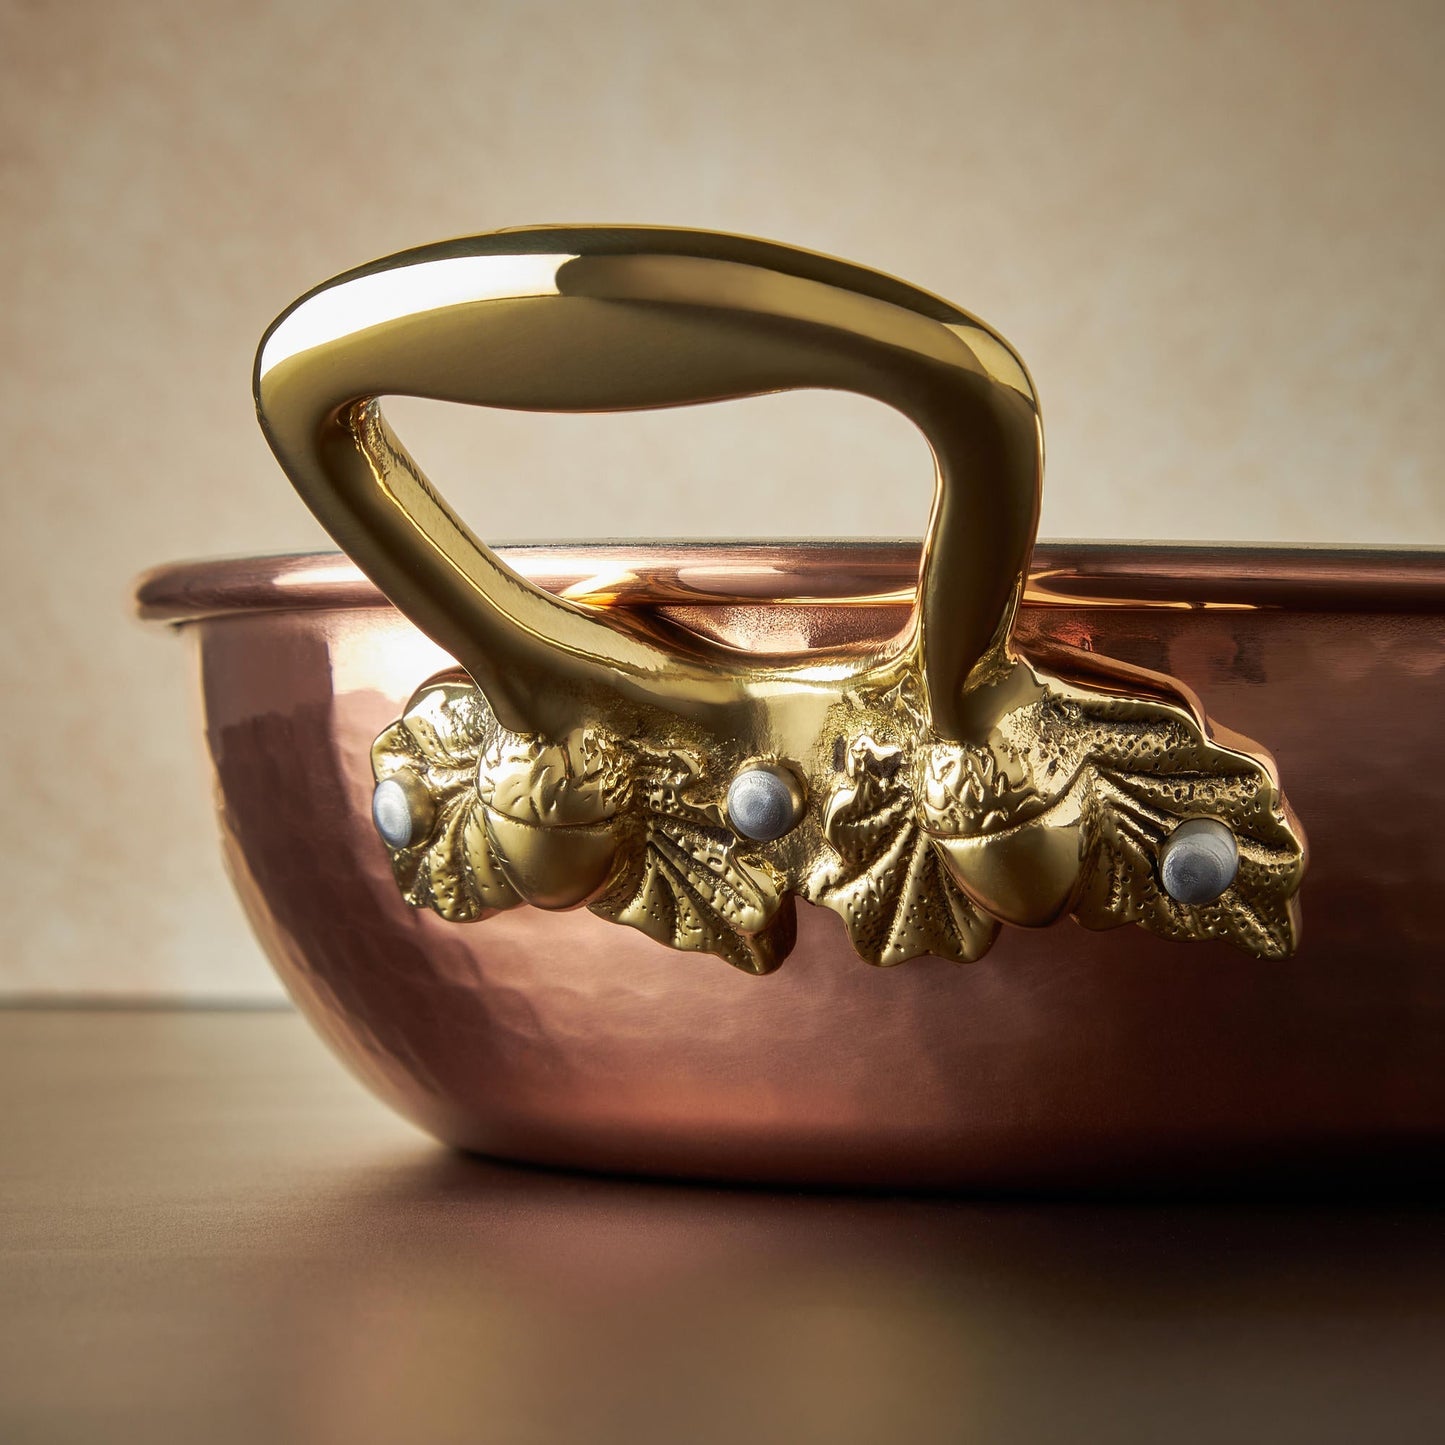 Beautiful bronze handle decorated with acorns on Historia hammered copper cookware by Ruffoni